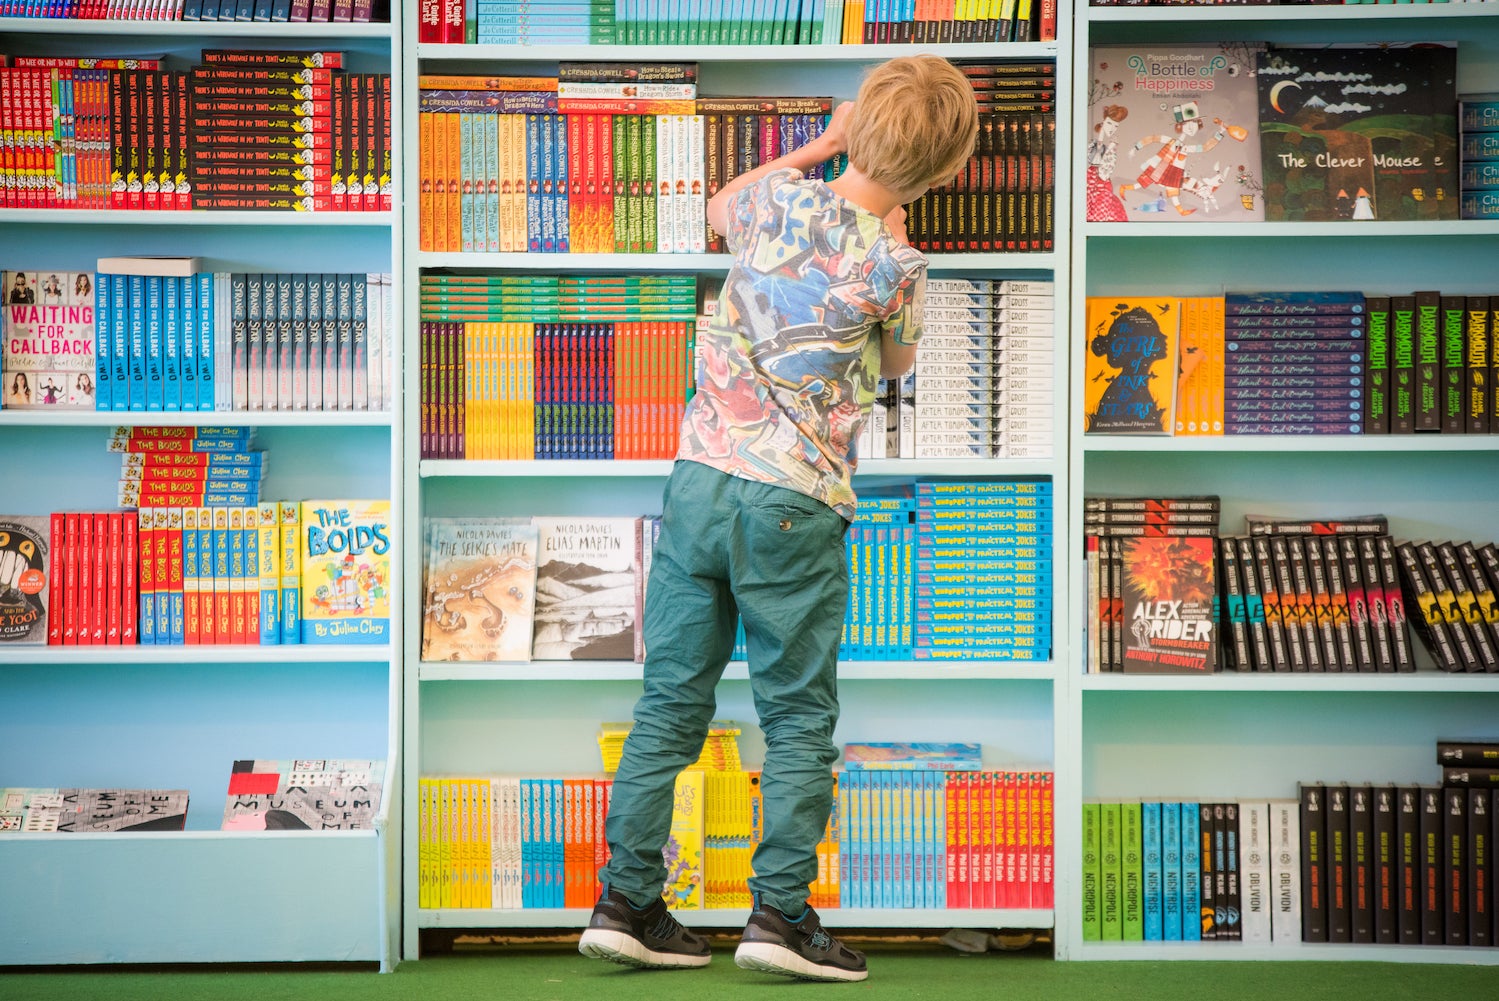 Fiction, non-fiction and children’s books stock shelves across Hay-on-Wye